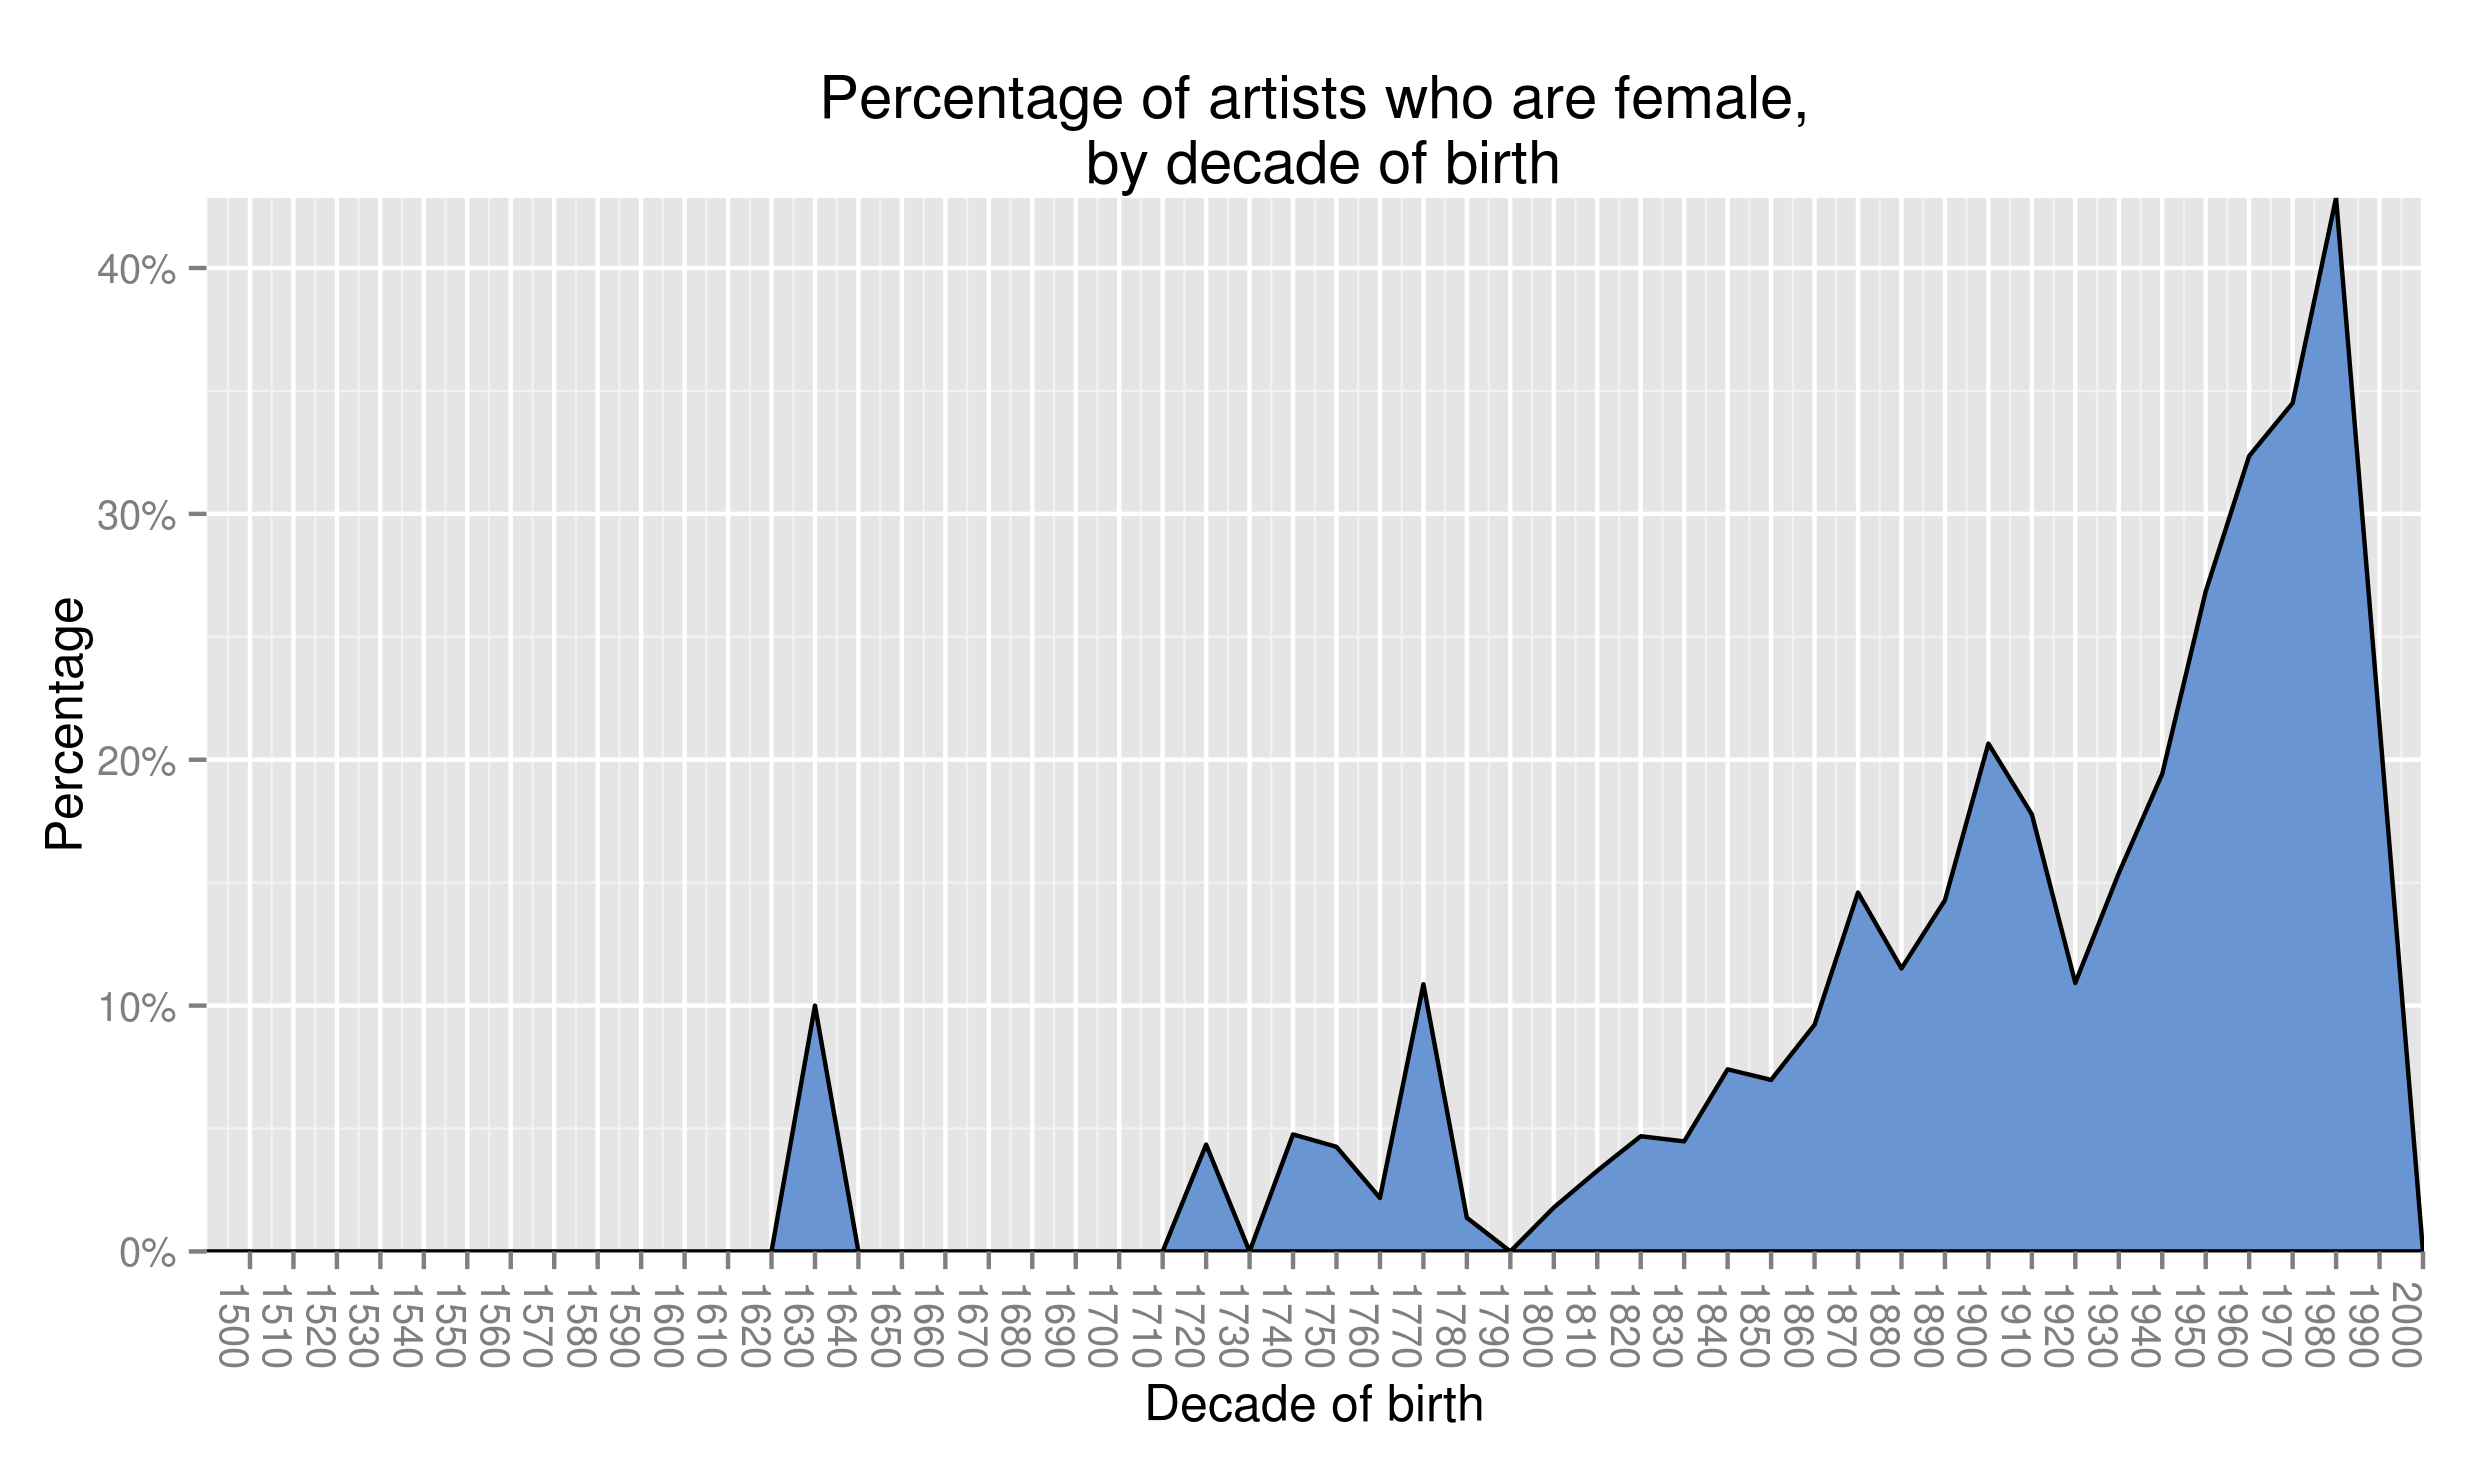 Representation of female artists in the Tate